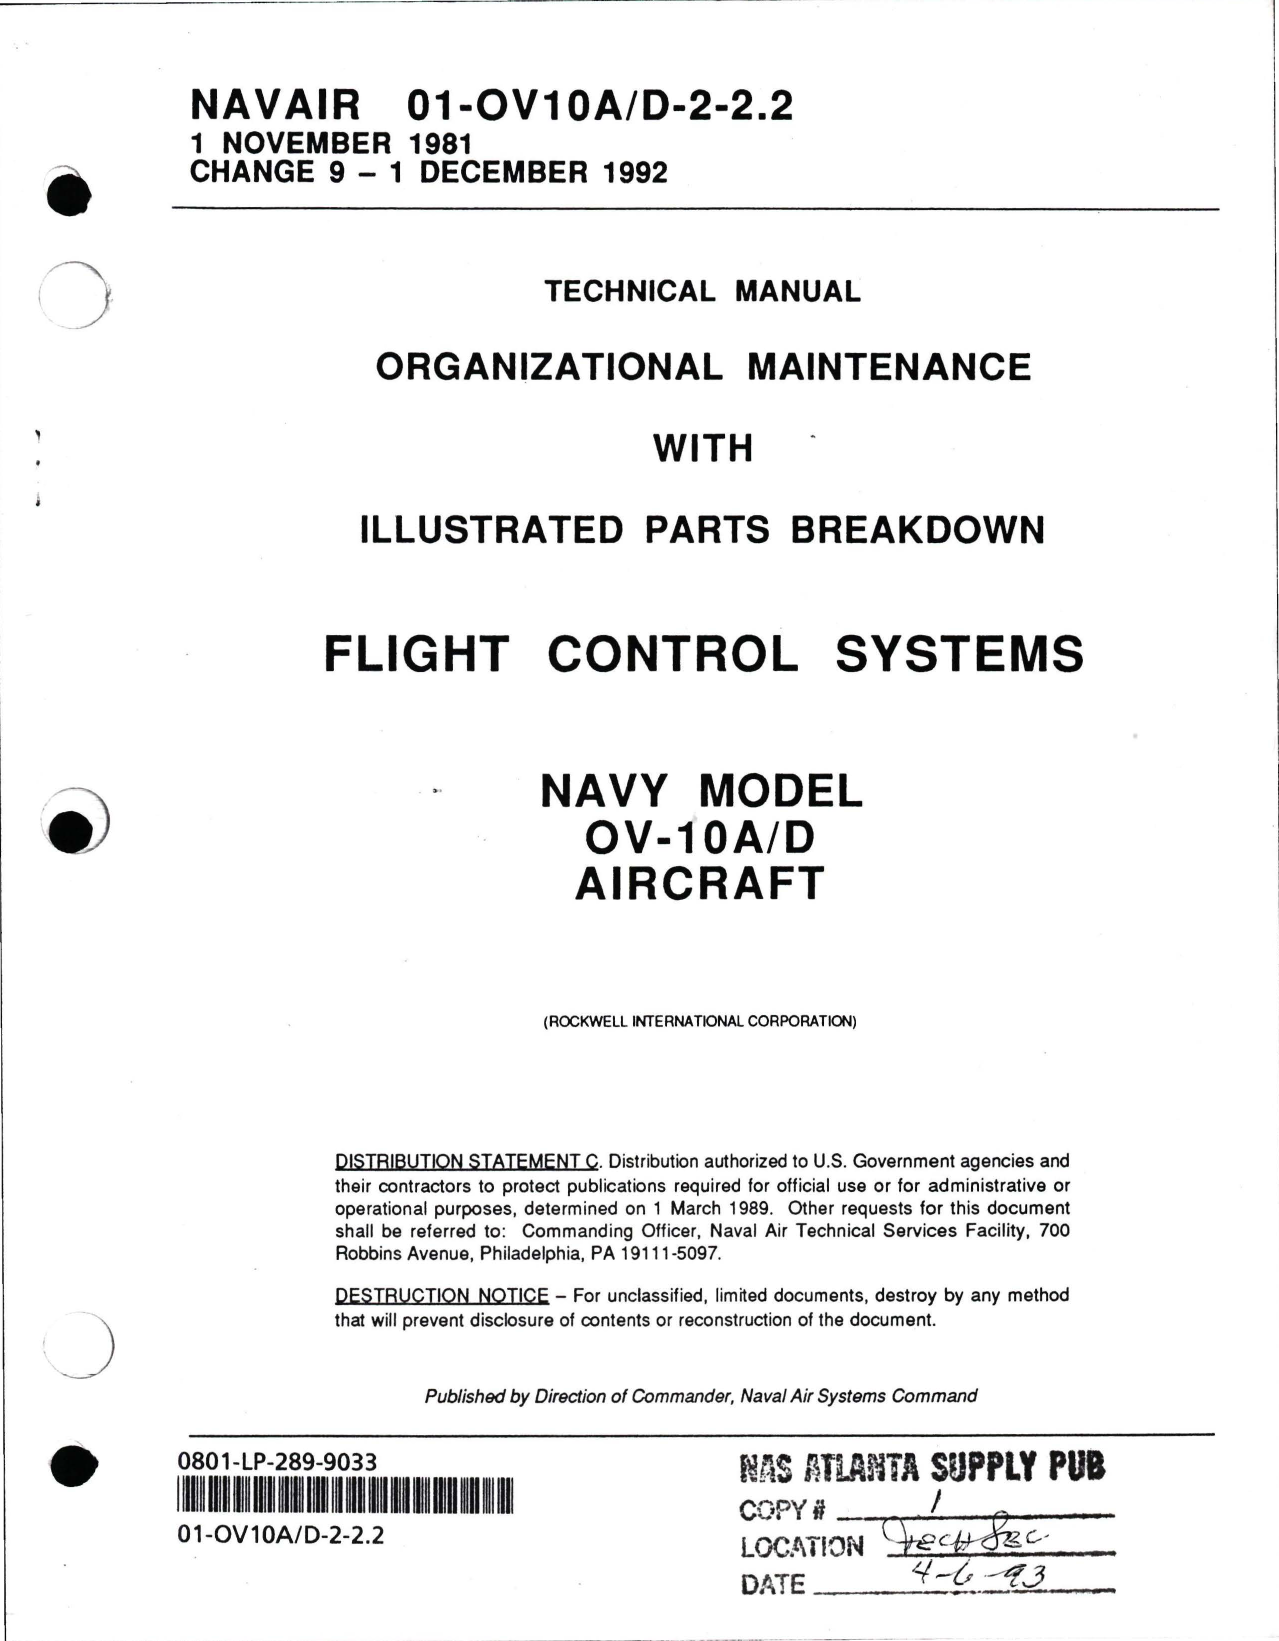 Sample page 1 from AirCorps Library document: Organizational Maintenance with Illustrated Parts Breakdown for Flight Control Systems for OV-10A/D